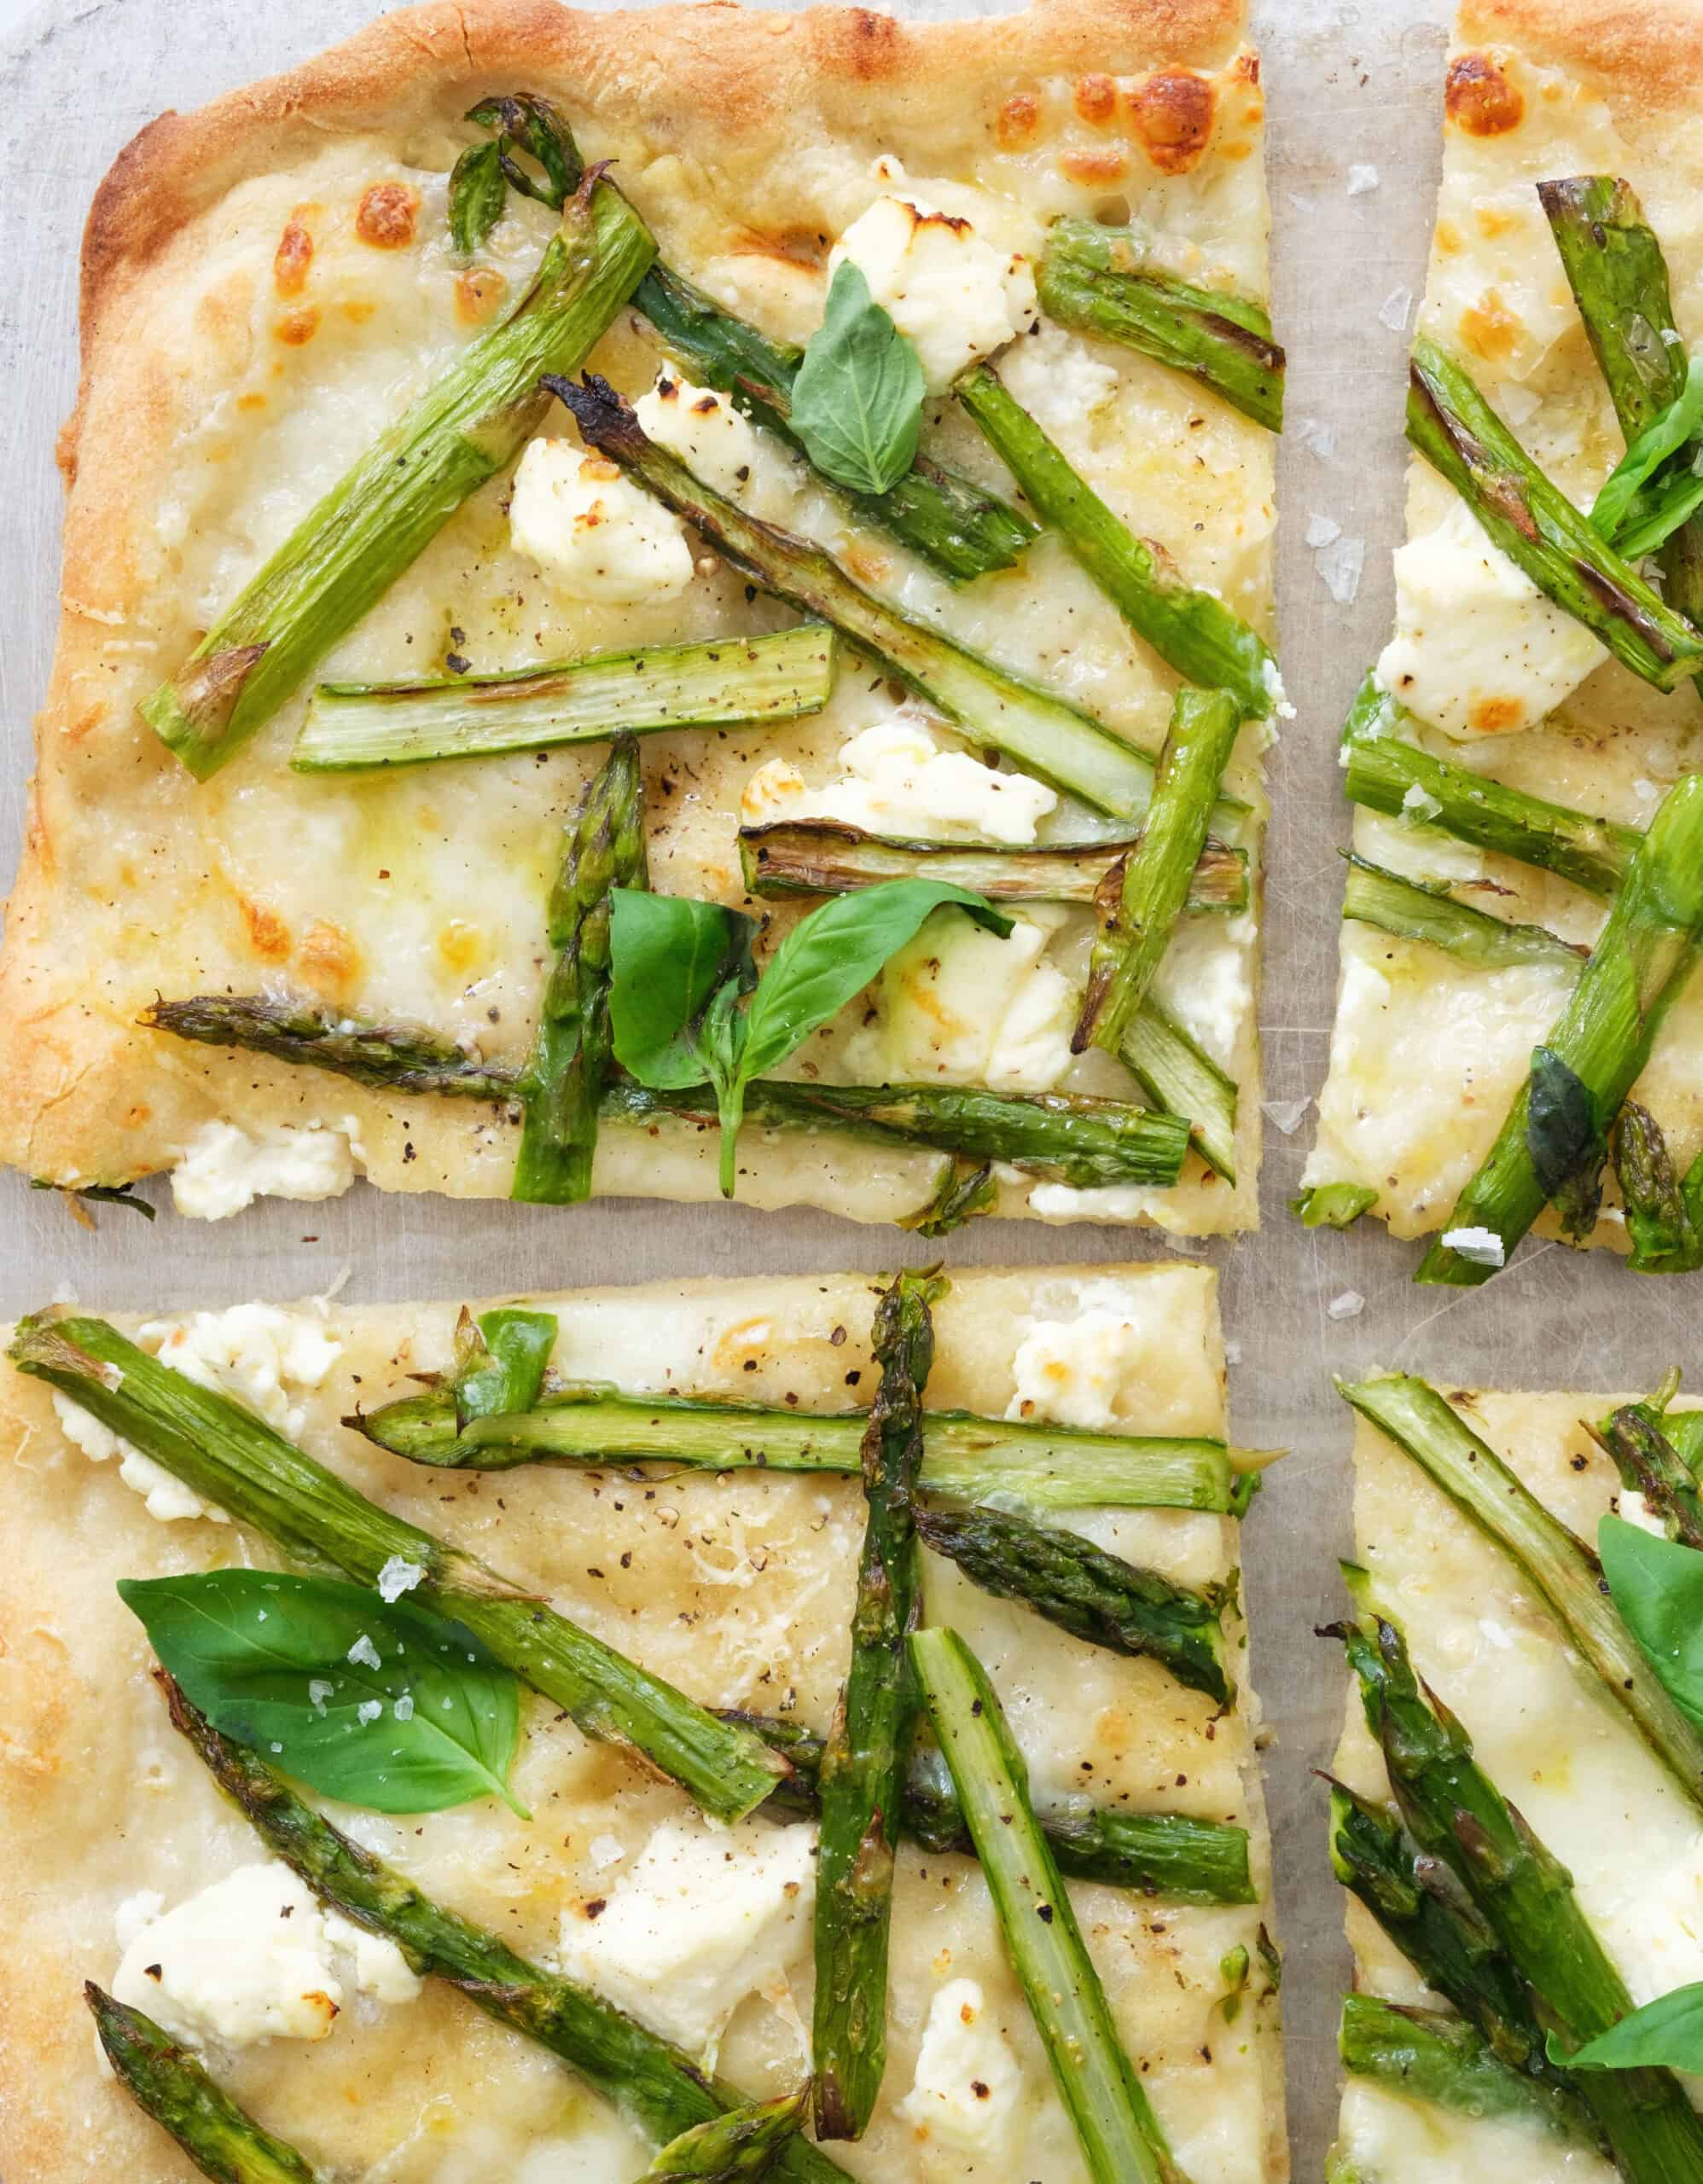 Close-up of few slices of asparagus pizza showing creamy cheese and crispy crust.